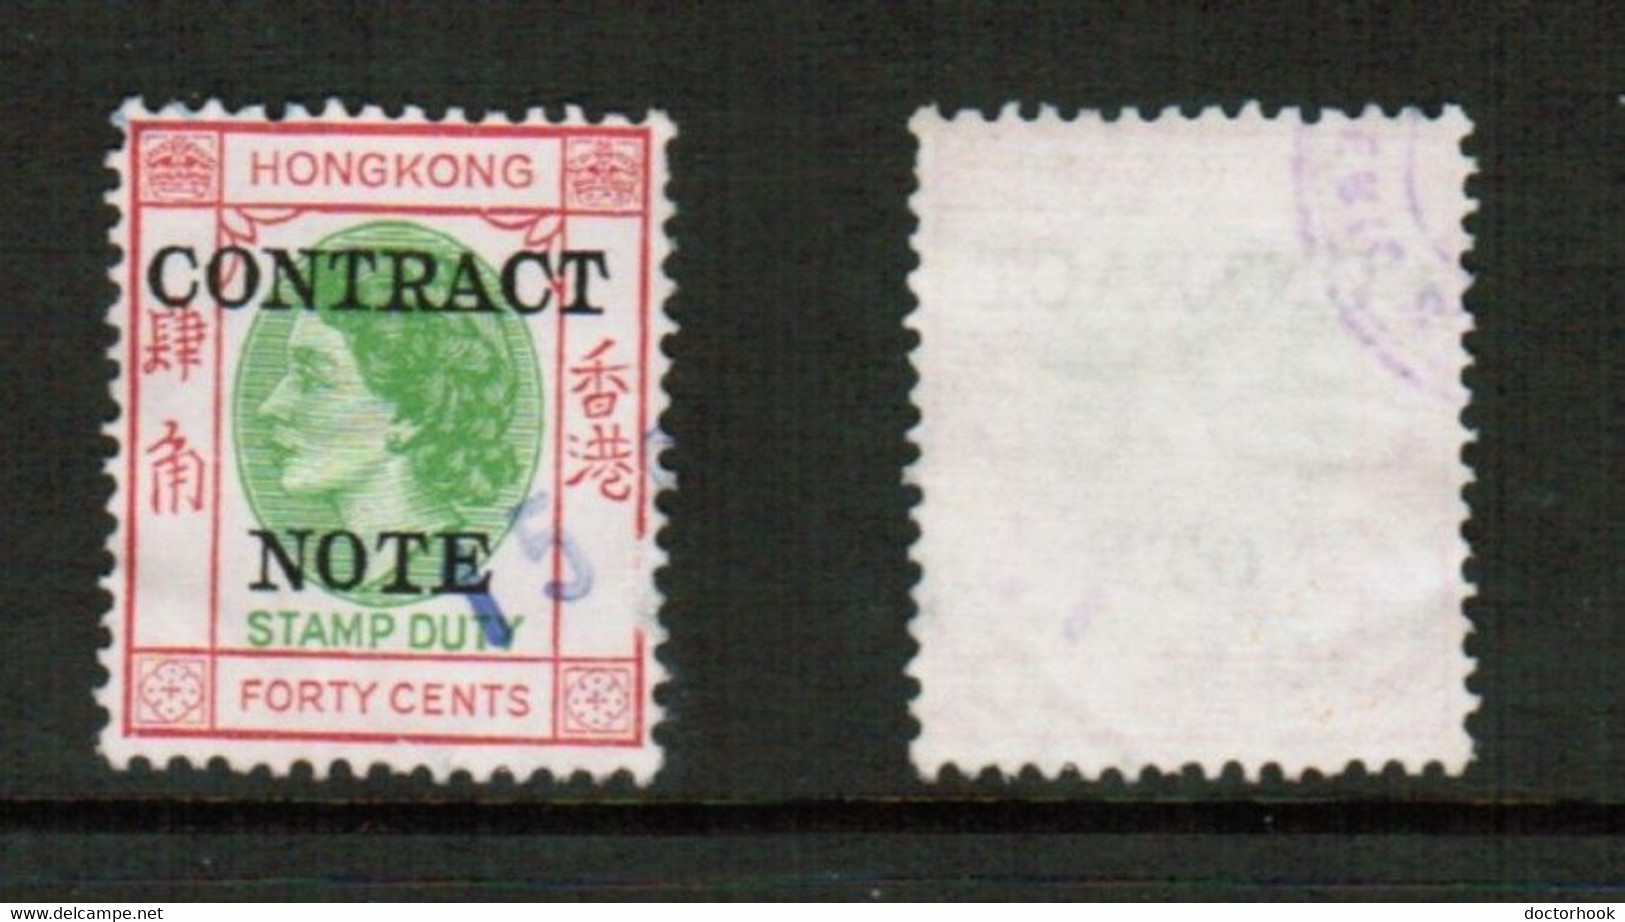 HONG KONG   40 CENT CONTRACT NOTE FISCAL USED THIN (CONDITION AS PER SCAN) (Stamp Scan # 828-10) - Post-fiscaal Zegels